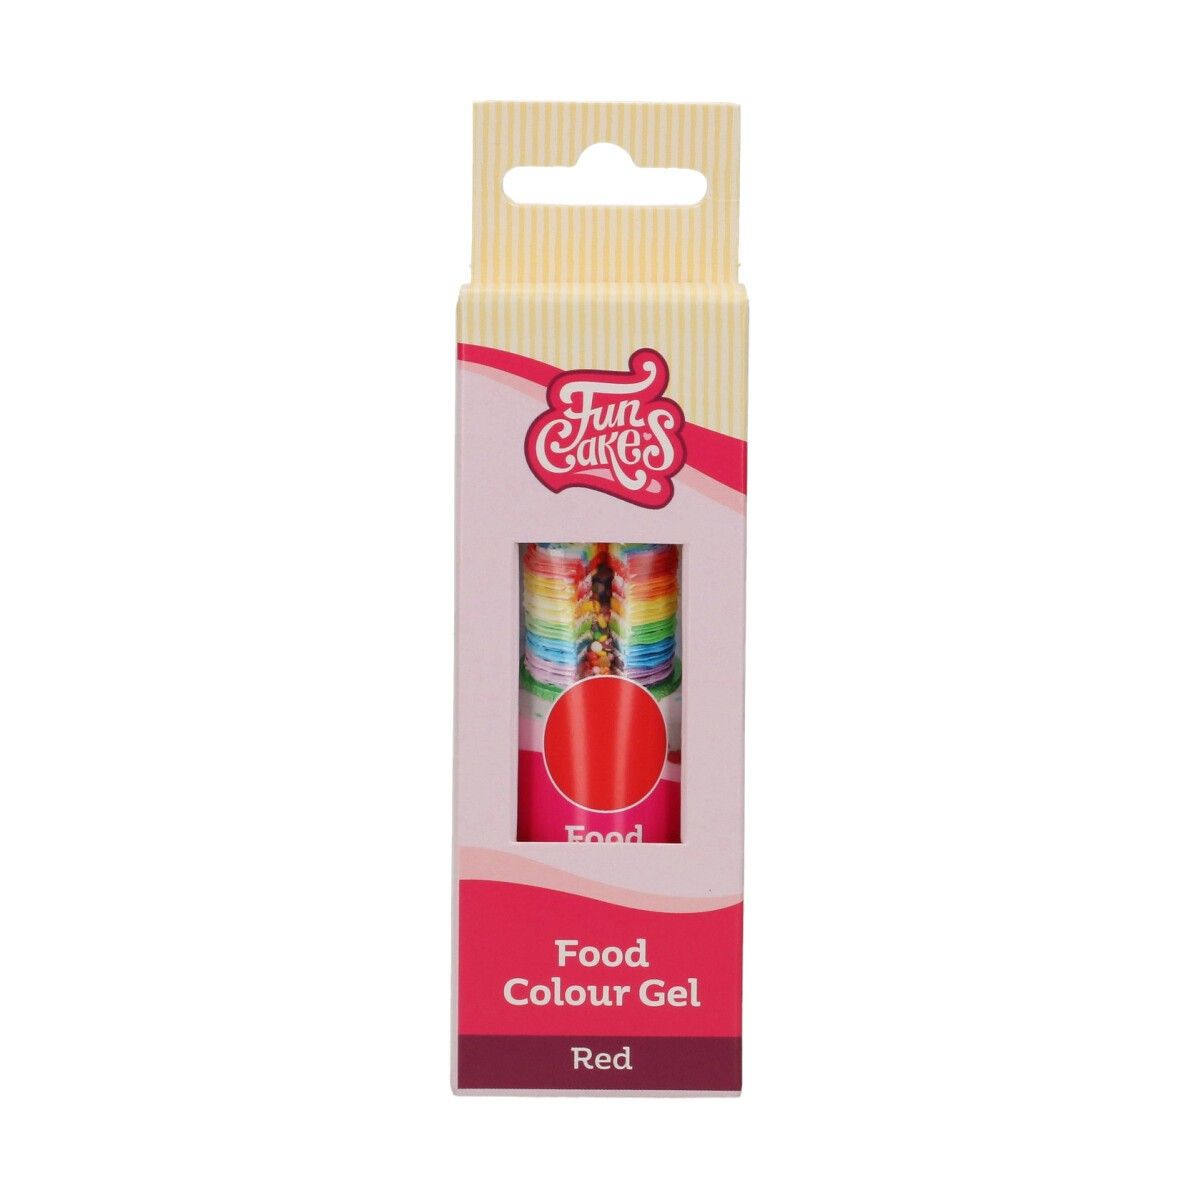 FUNCAKES EDIBLE FUNCOLOURS GEL - RED, ROT 30g